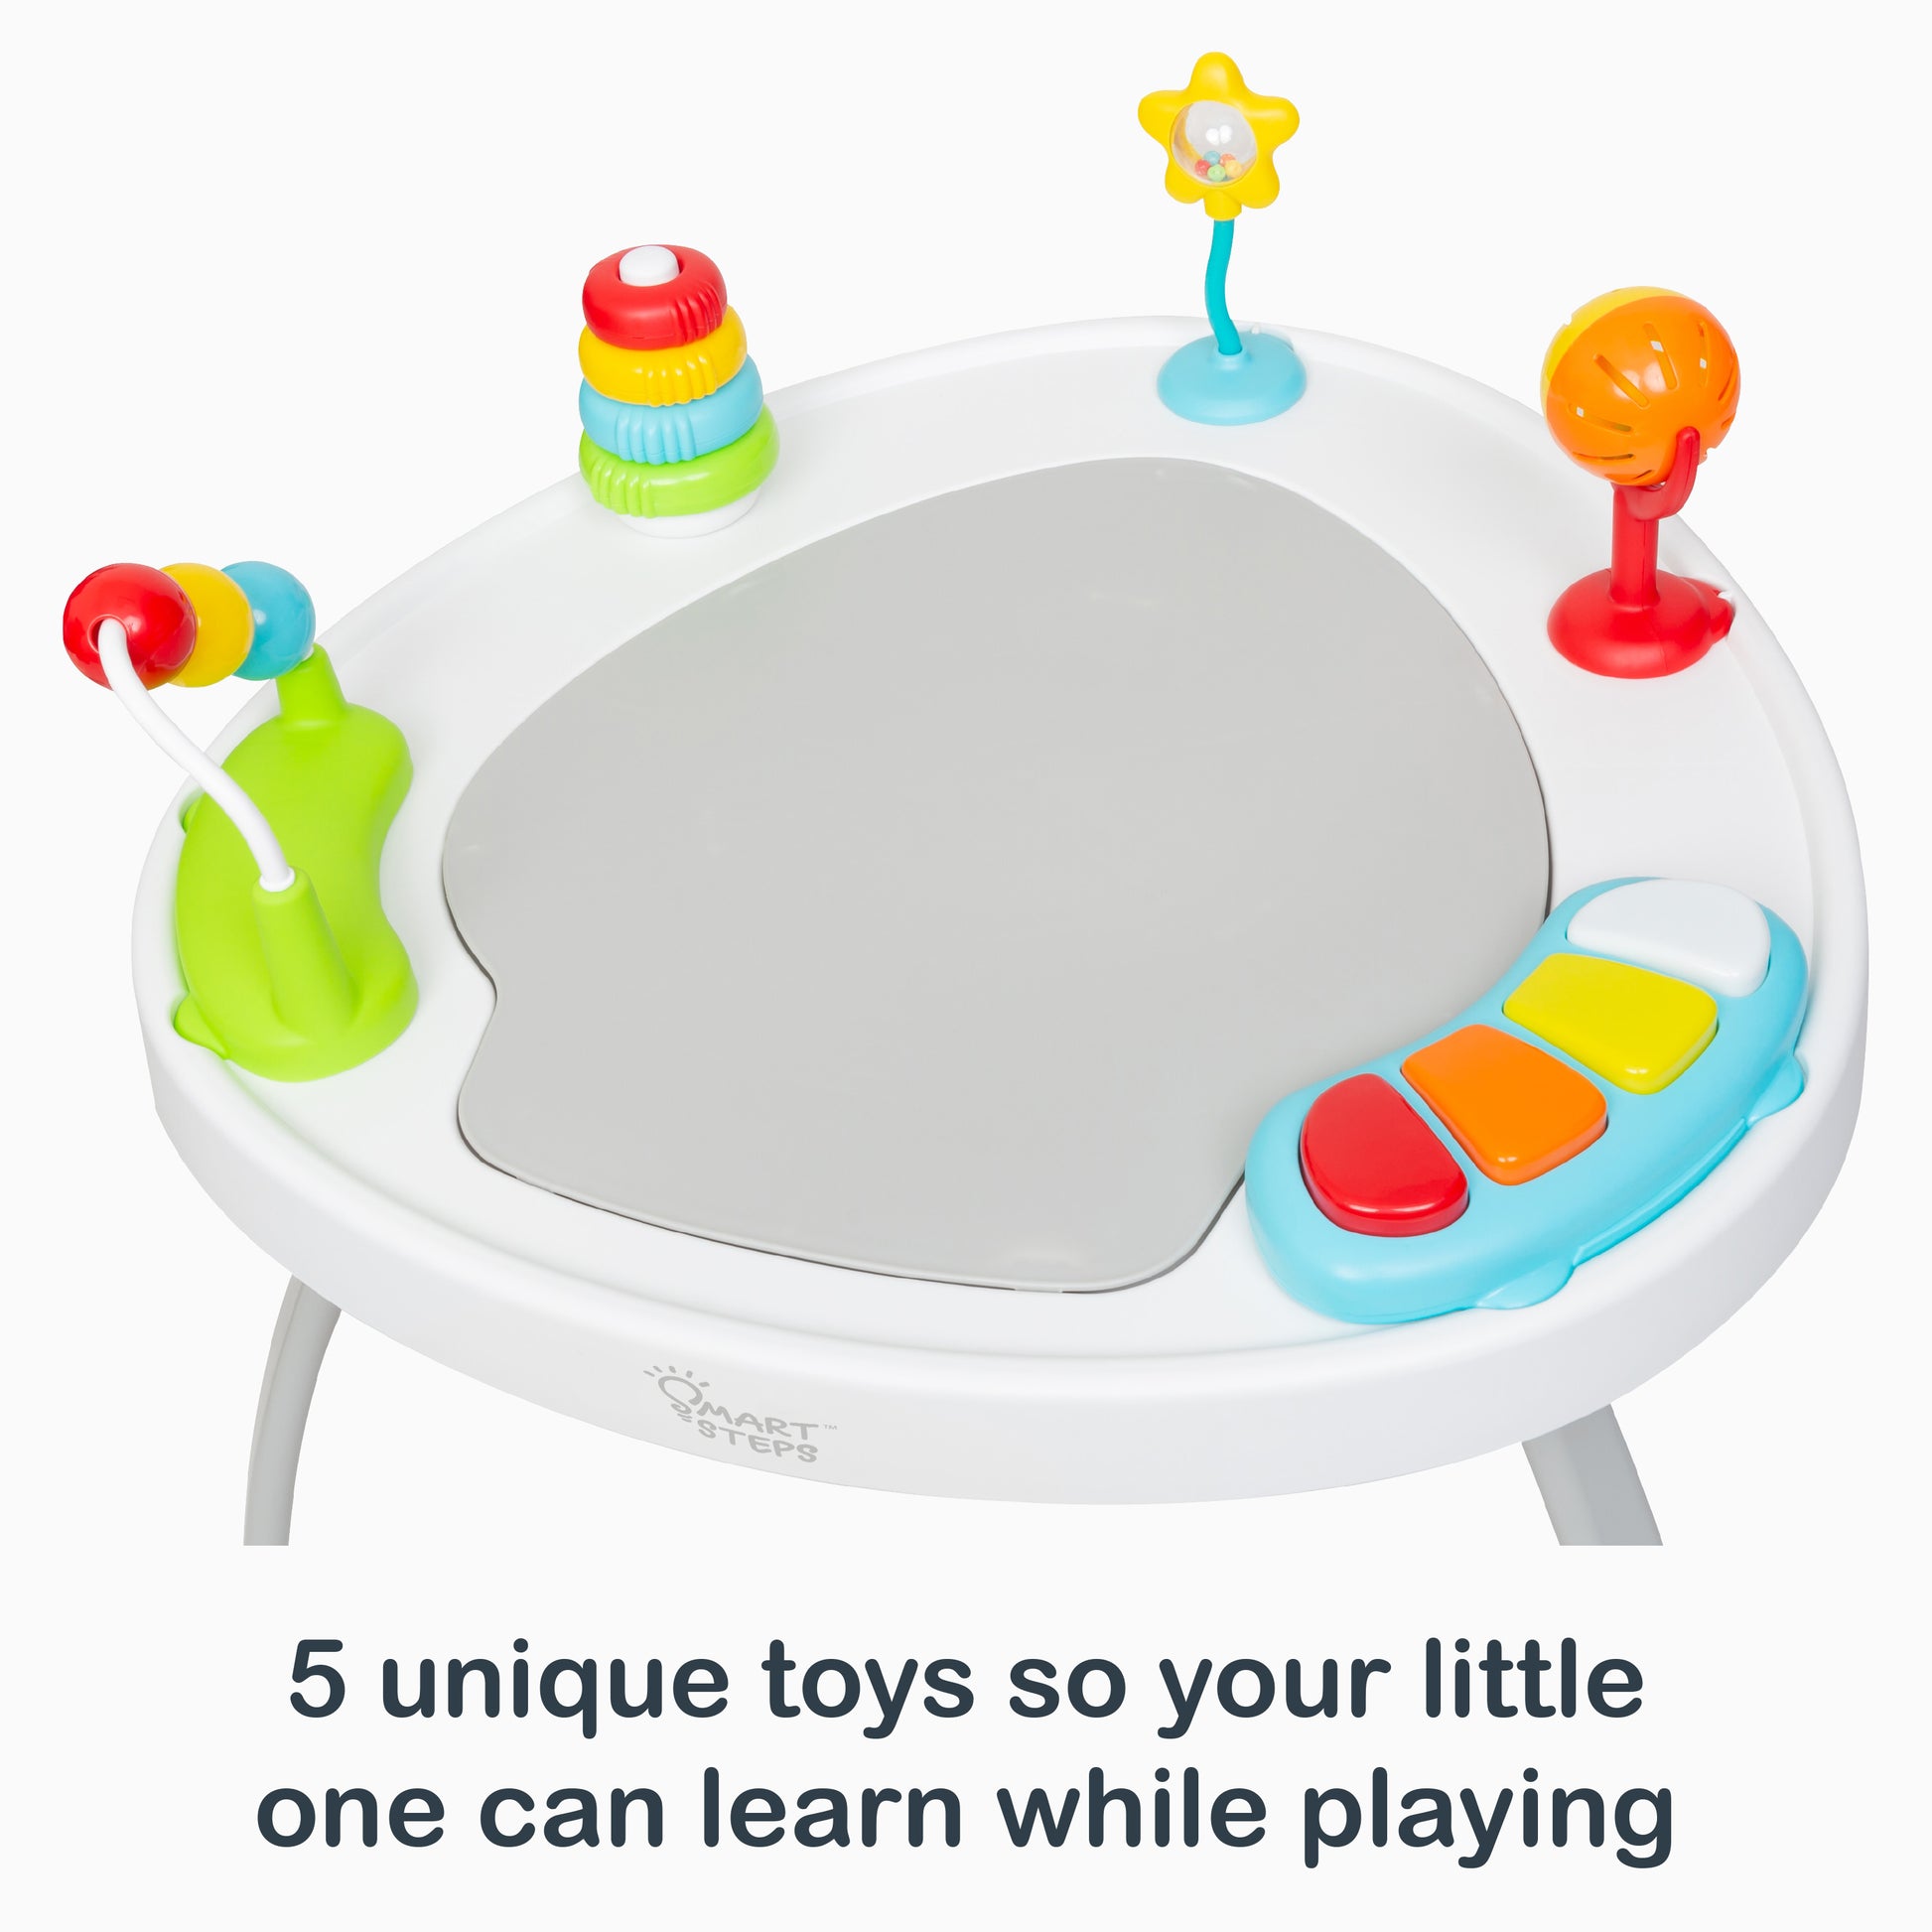 Smart Steps by Baby Trend Bounce N’ Play 3-in-1 Activity Center includes 5 unique toys so your little one can learn while playing